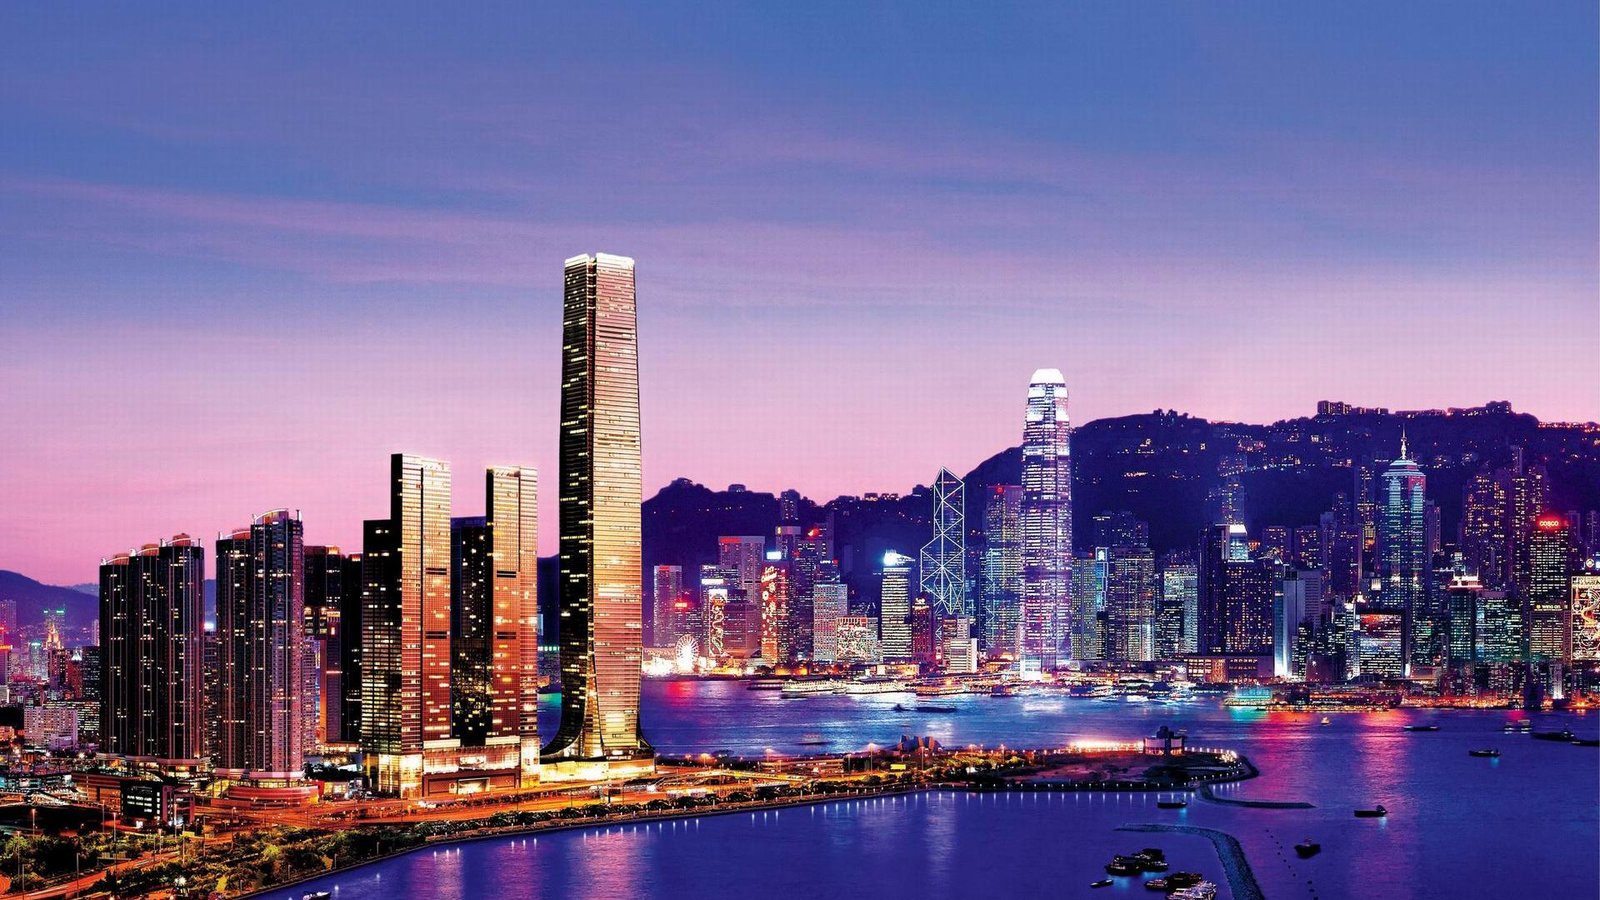 Hong Kong now second most expensive city in Asia Pacific, survey finds